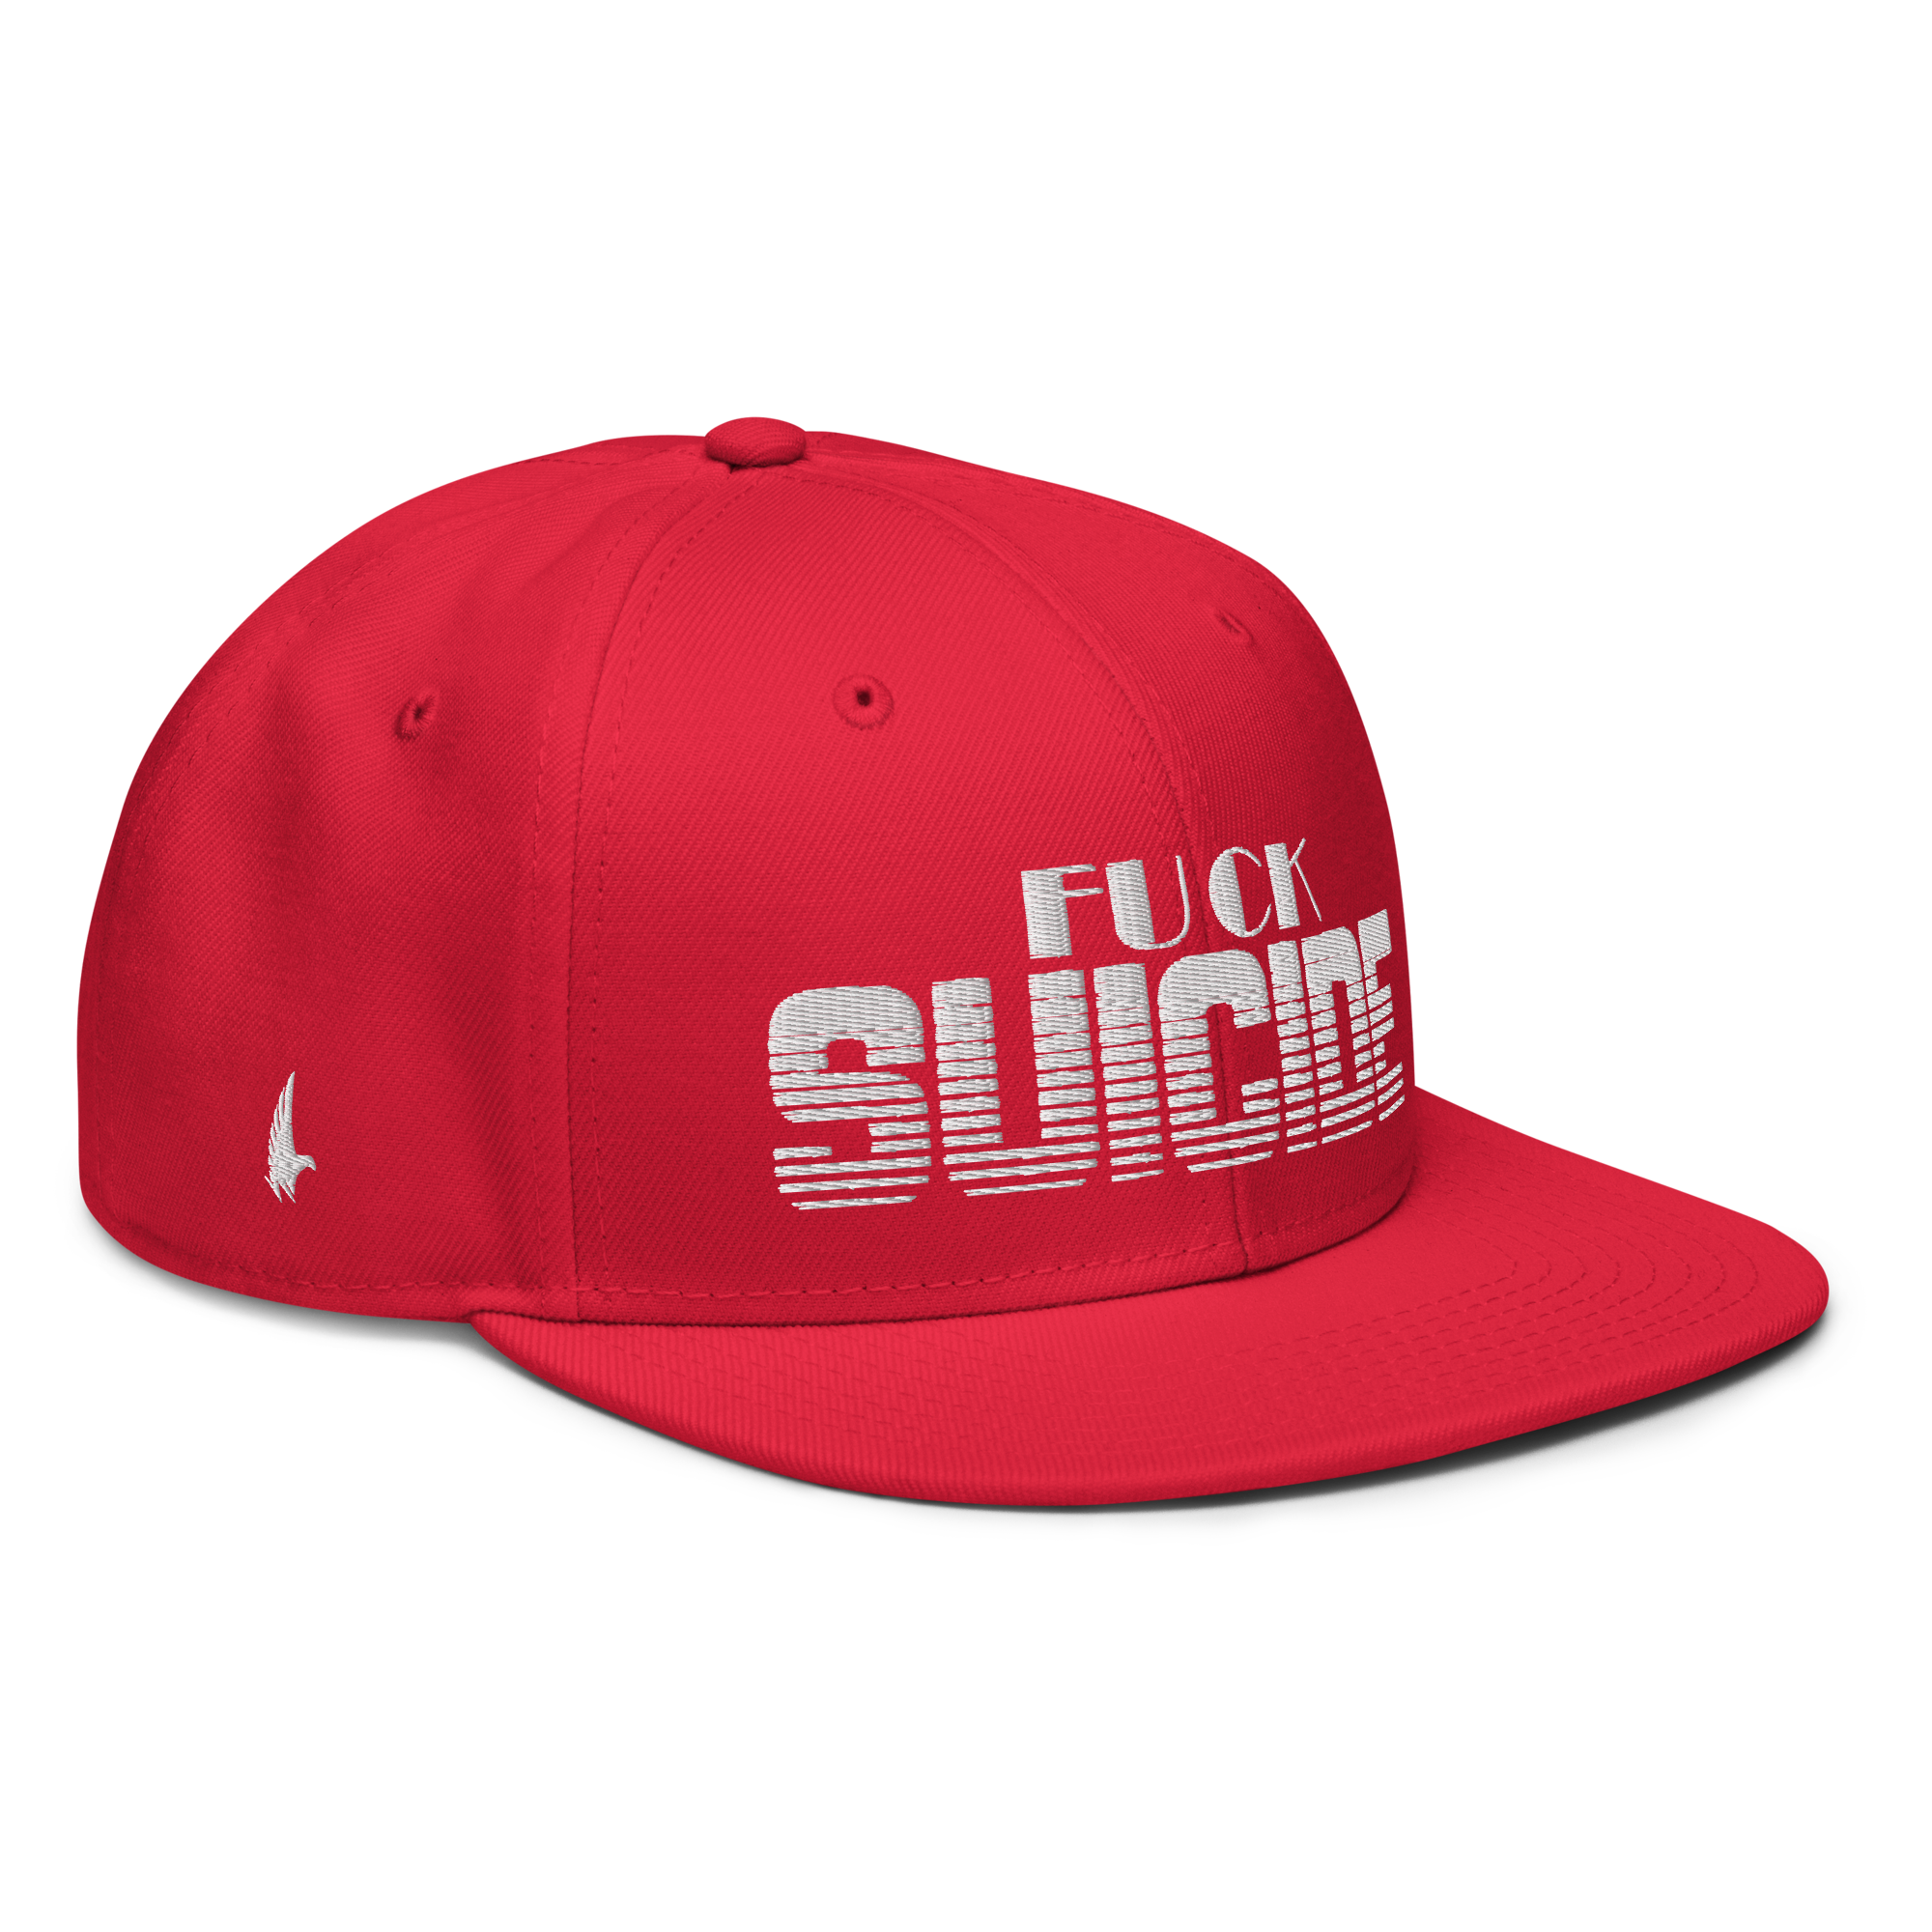 Fk Suicide Snapback Hat - Red OS - Loyalty Vibes